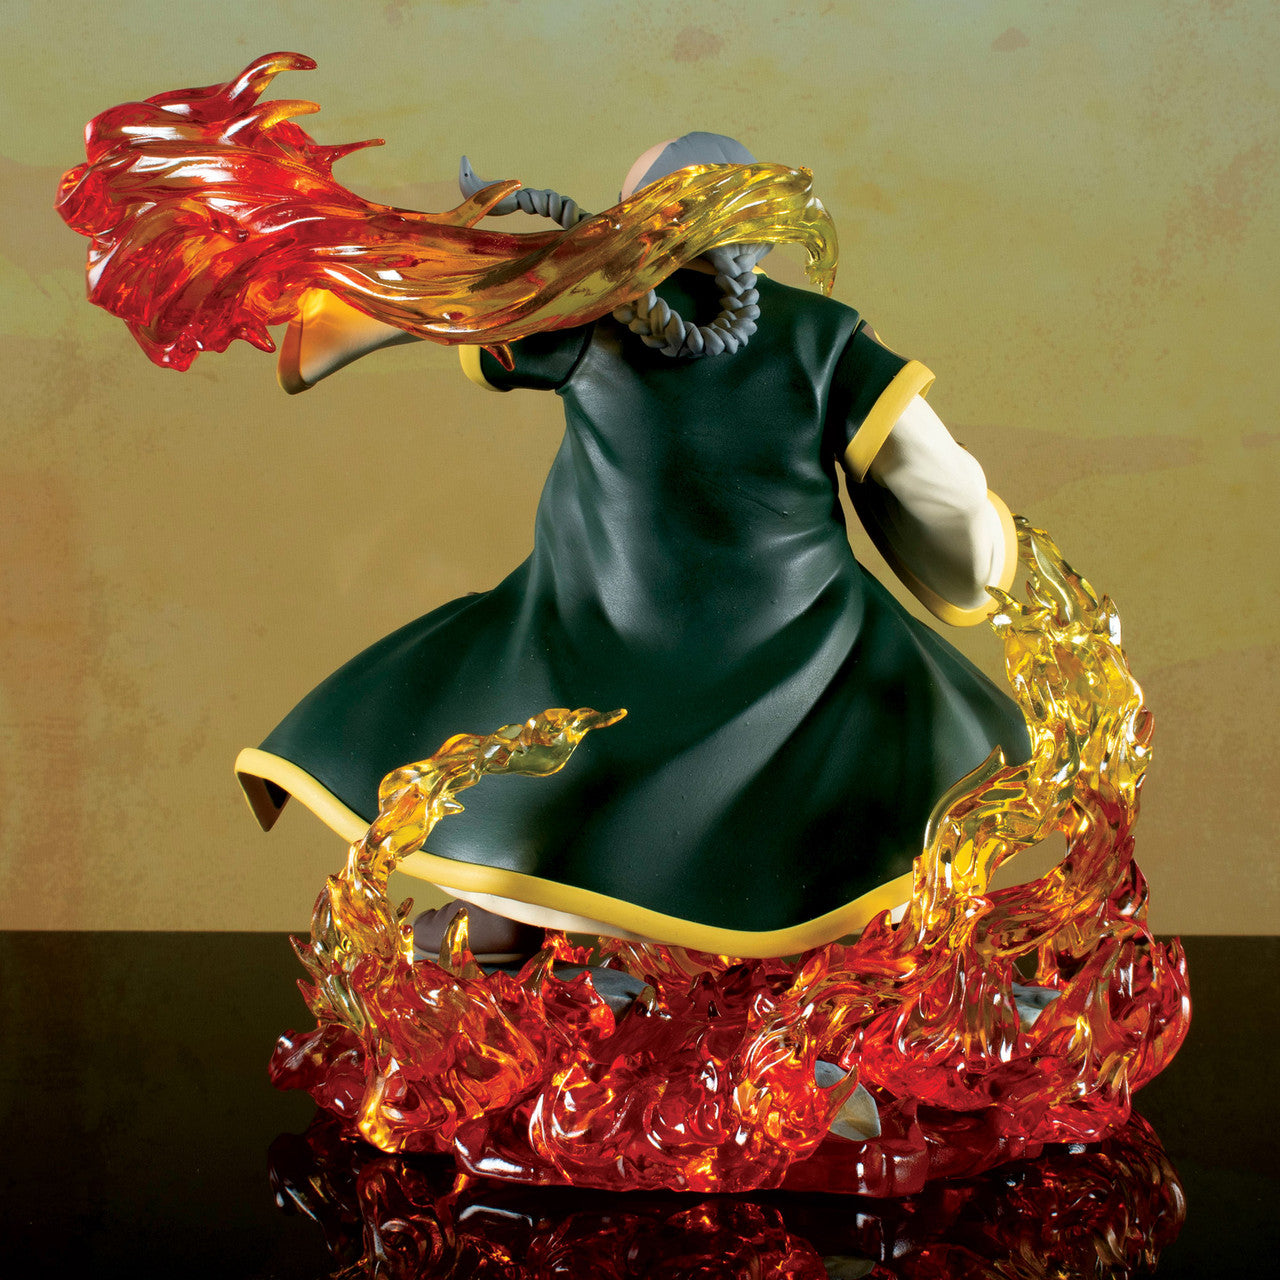 *Pre-Order* Uncle Iroh (Avatar: The Last Airbender) Gallery Statue